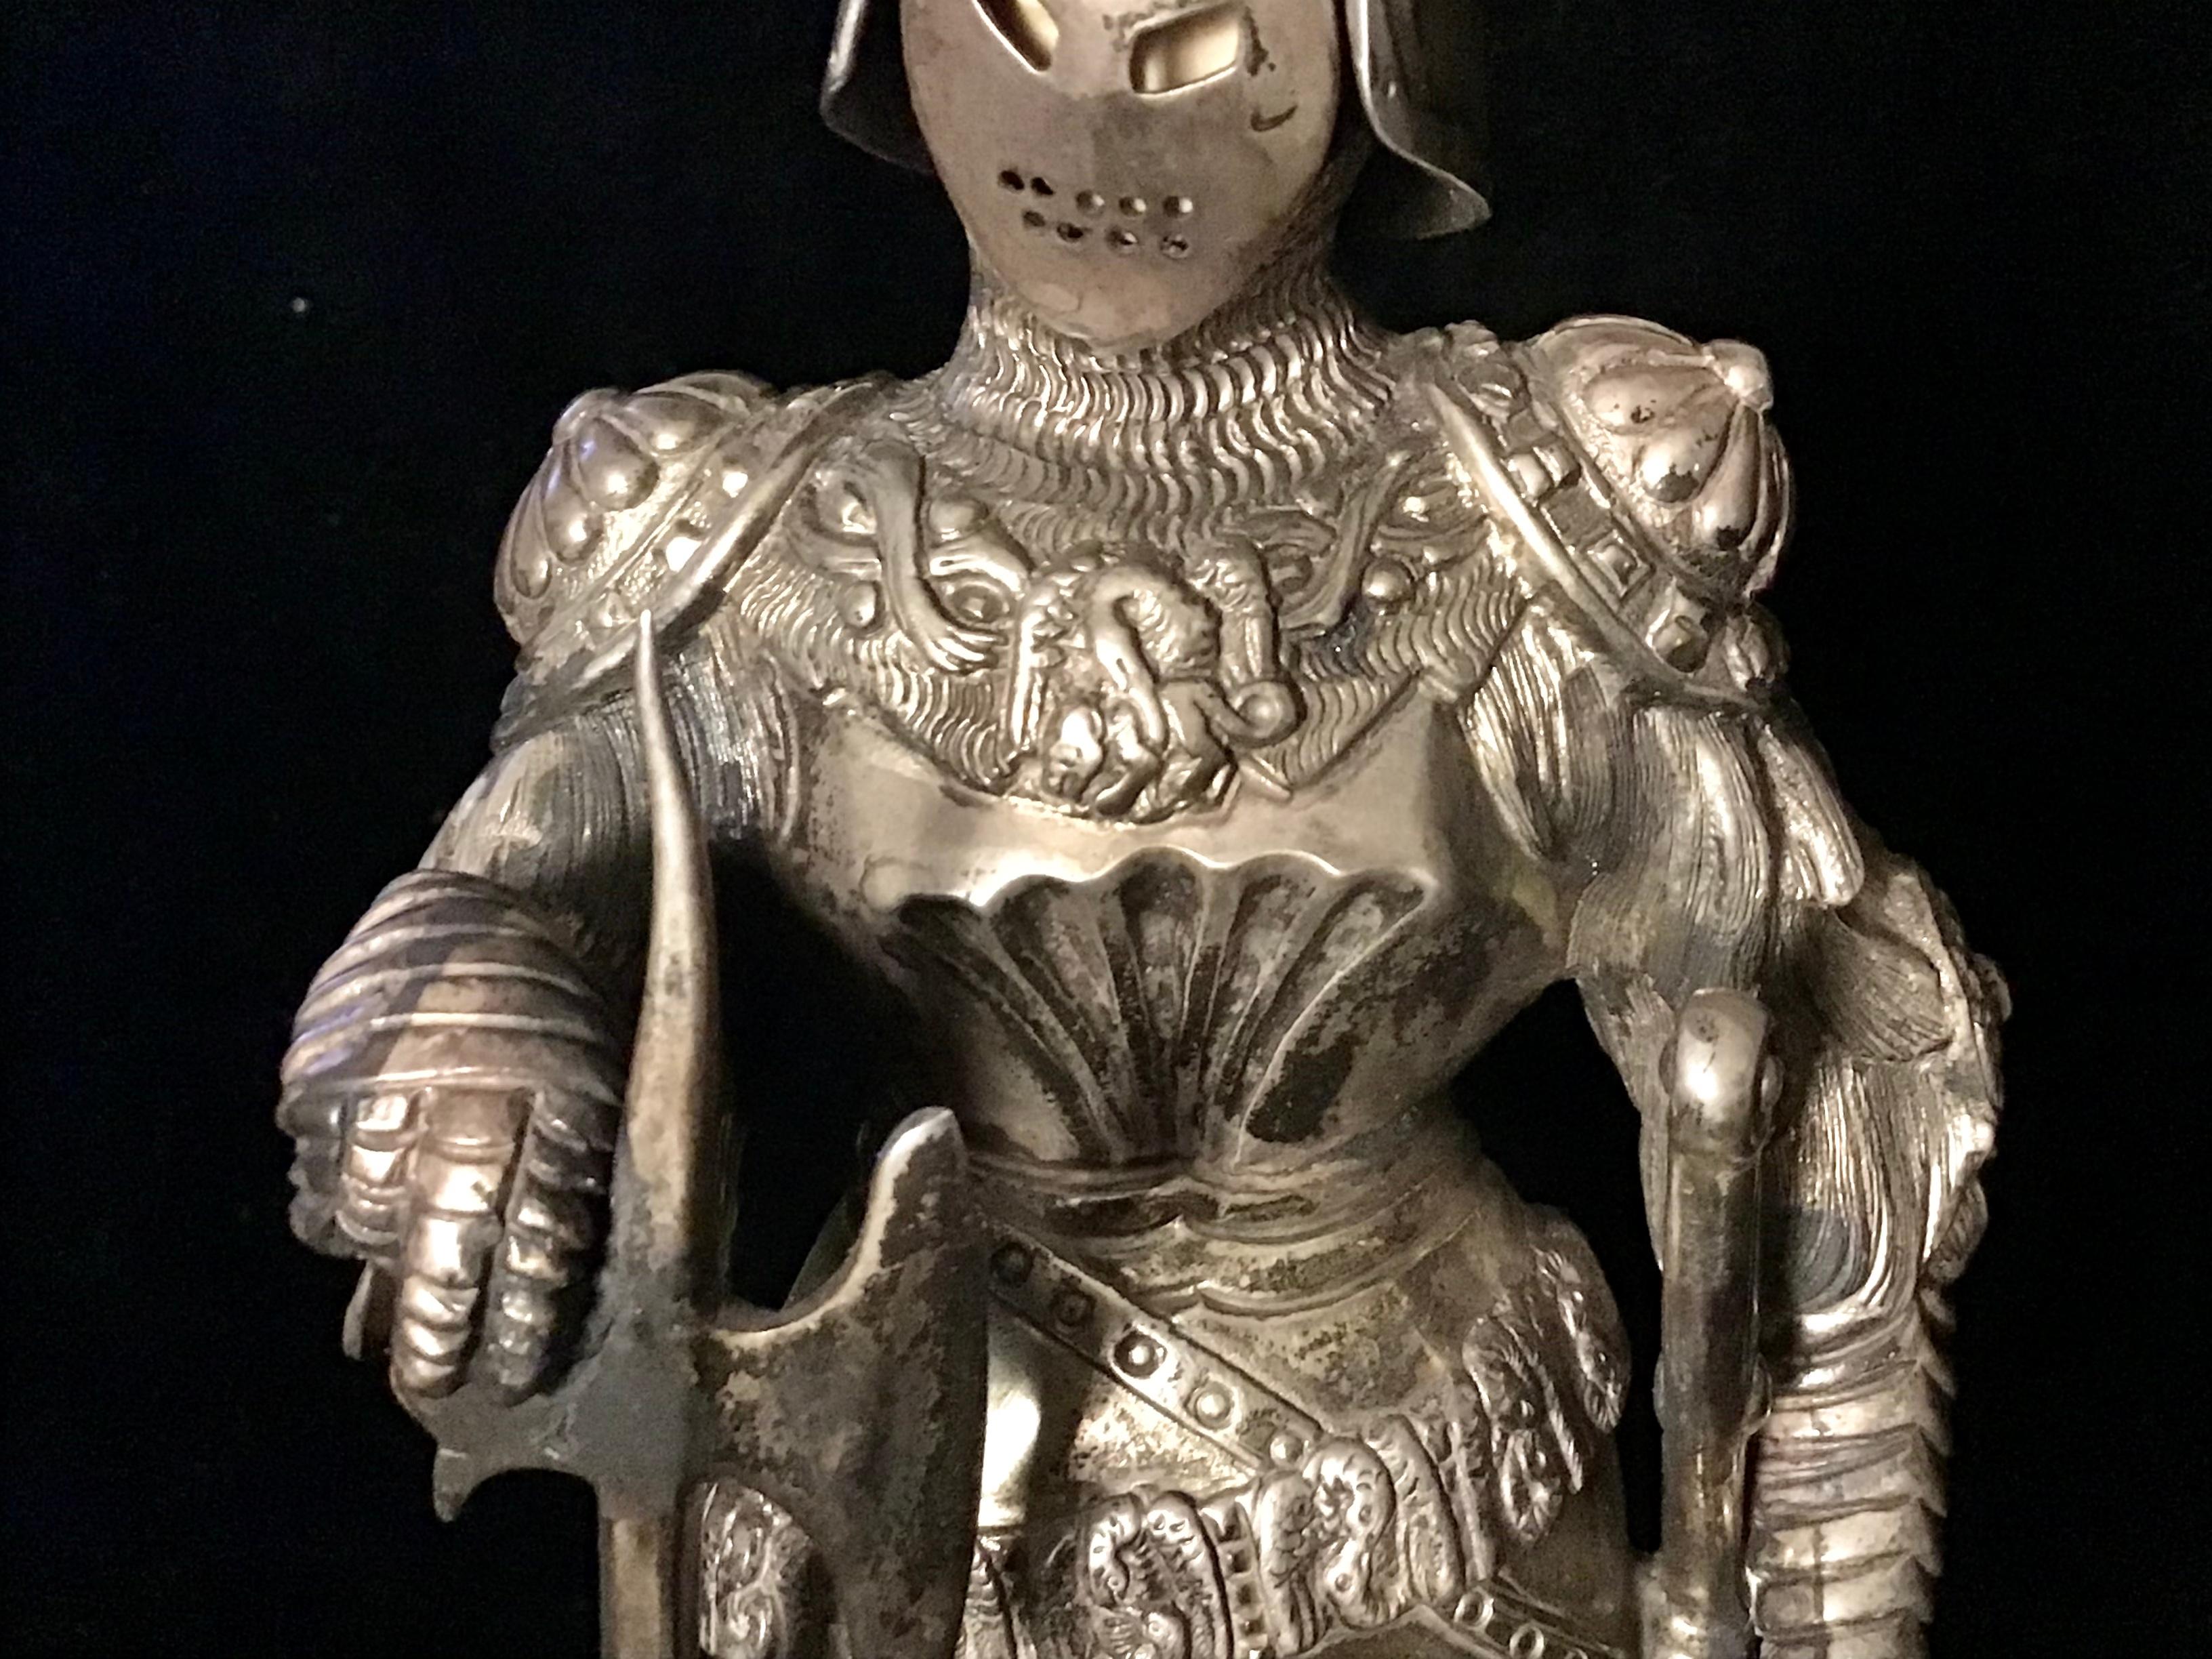 Antique early-20th century large and fine German solid silver figure, modelled as a knight in full suit of armour, carved face beneath a hinged visor, one sporting a axe and the other a shield, chased with armorials. Standing on a large, embellished